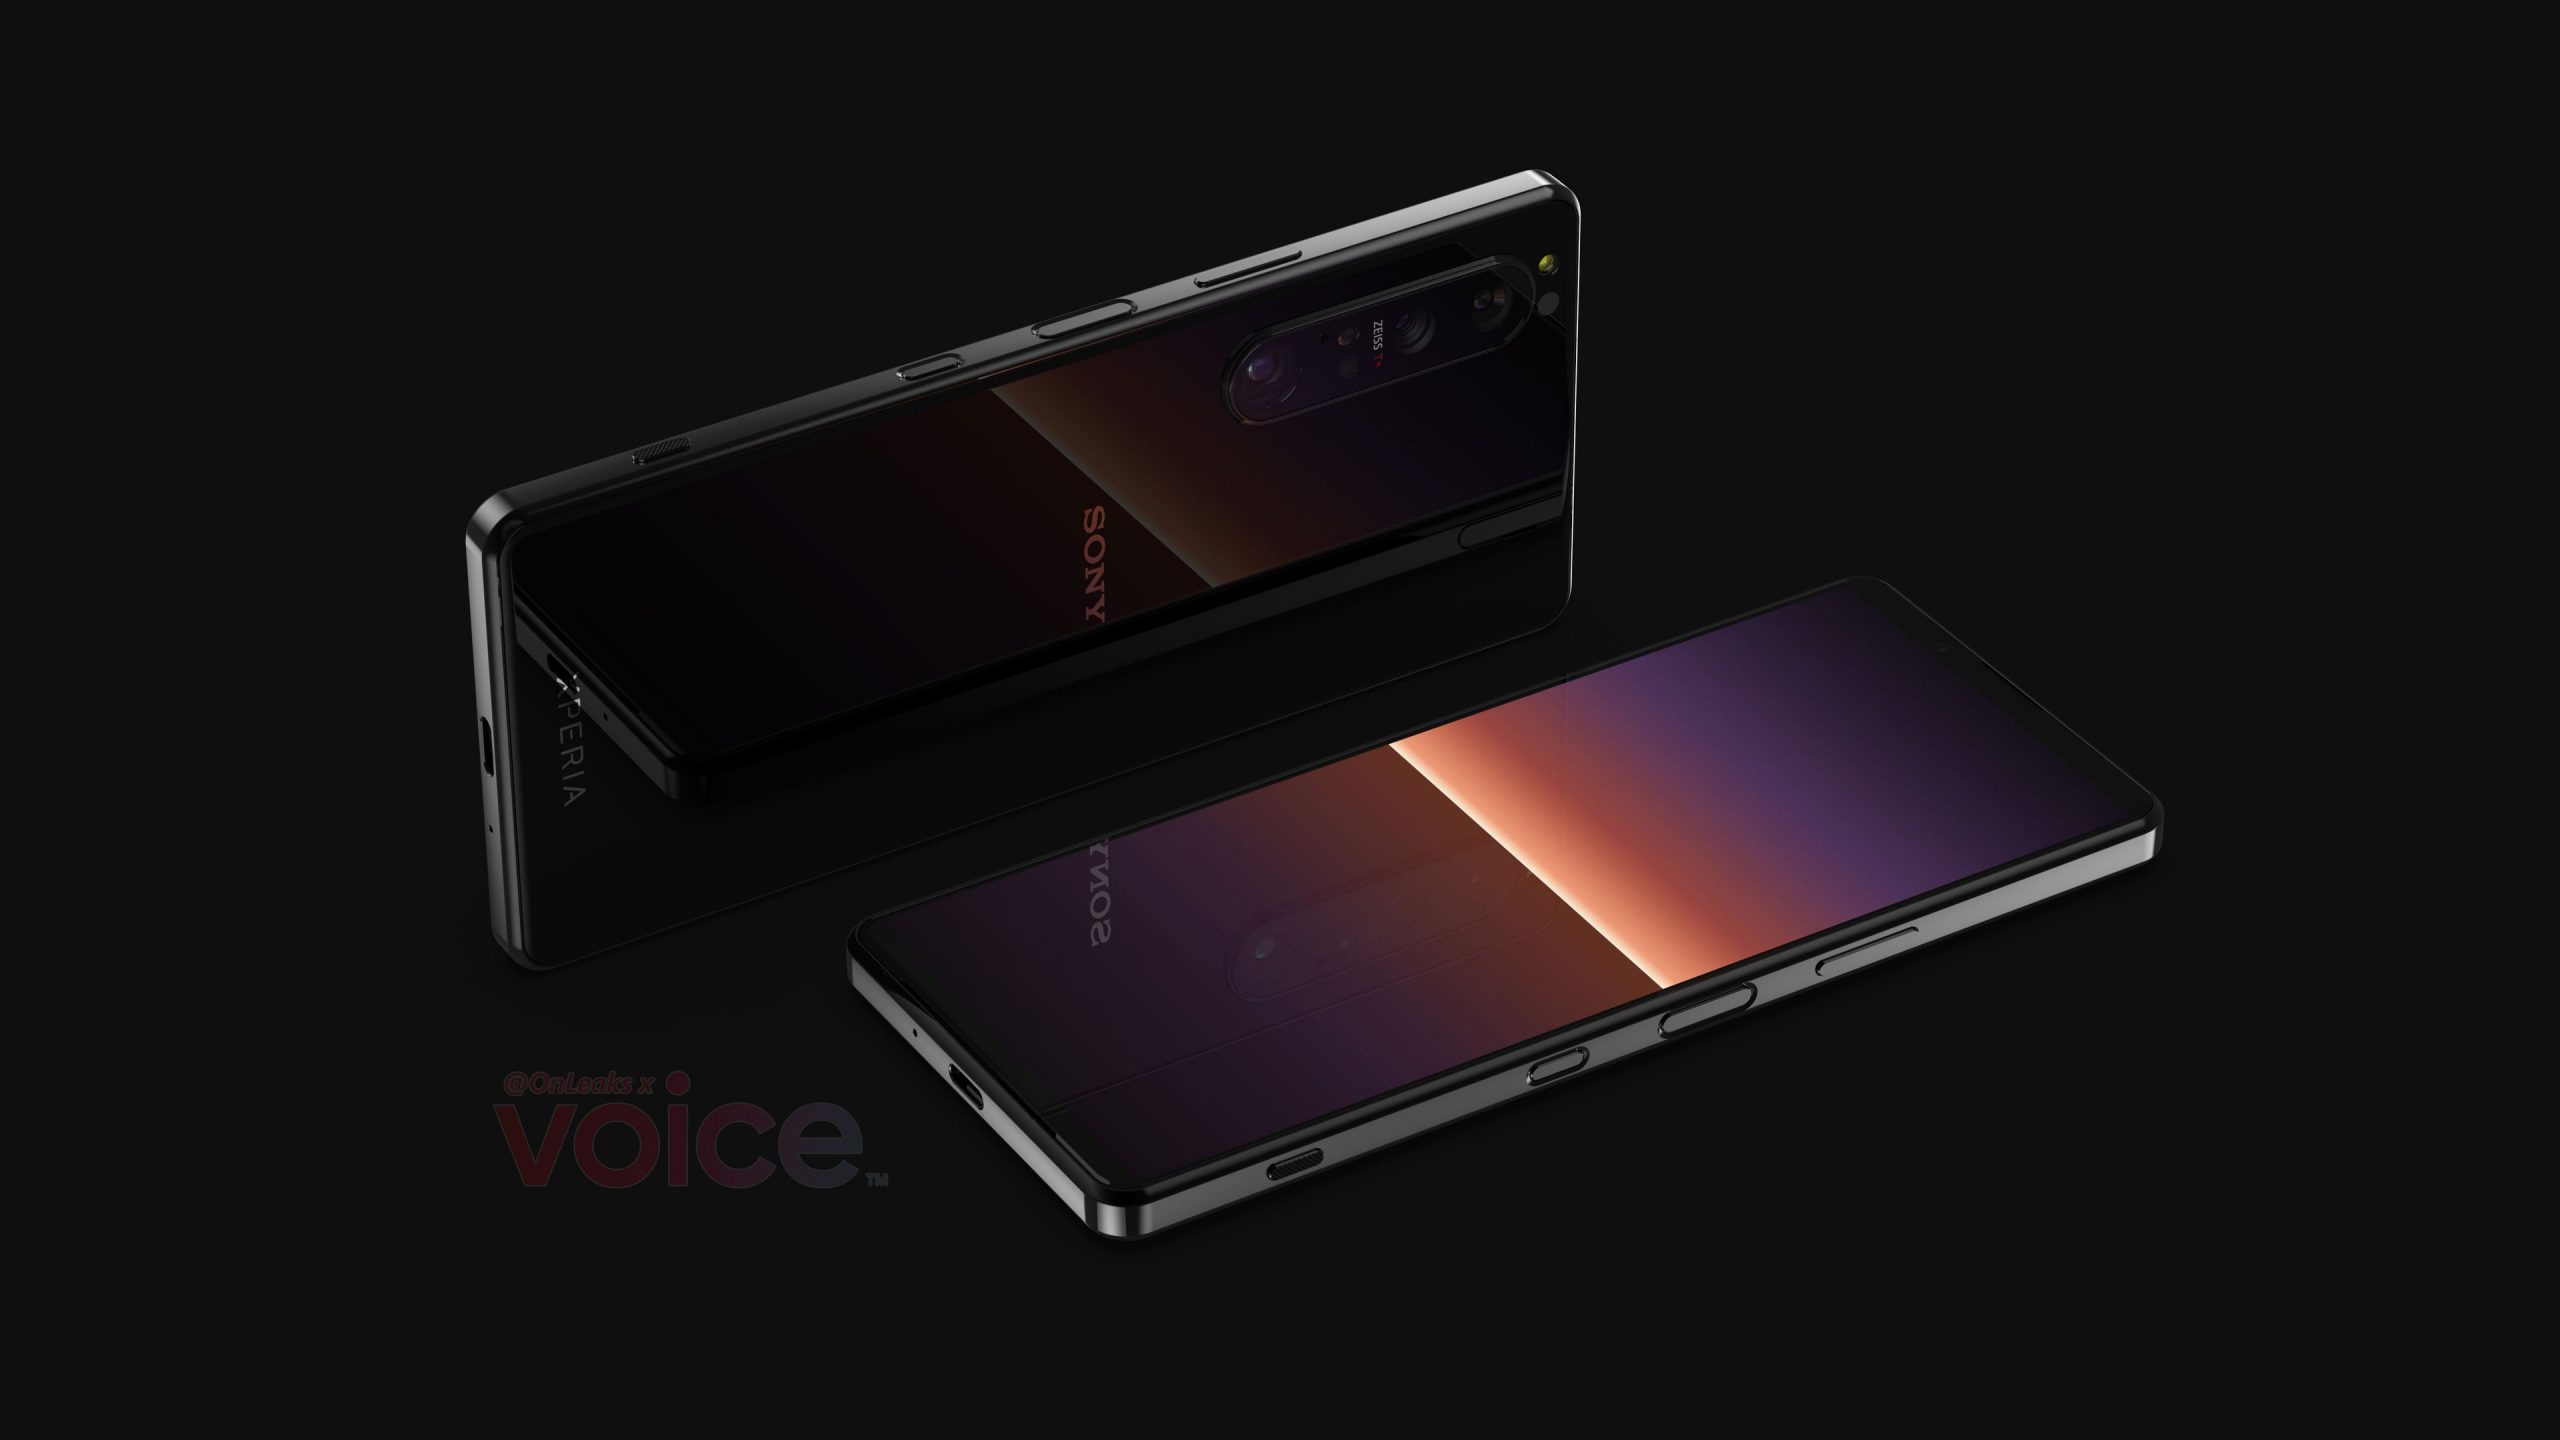 Sony Xperia 1 III specifications leak reveals 120Hz display, SD888, periscope camera, 65W charging and more